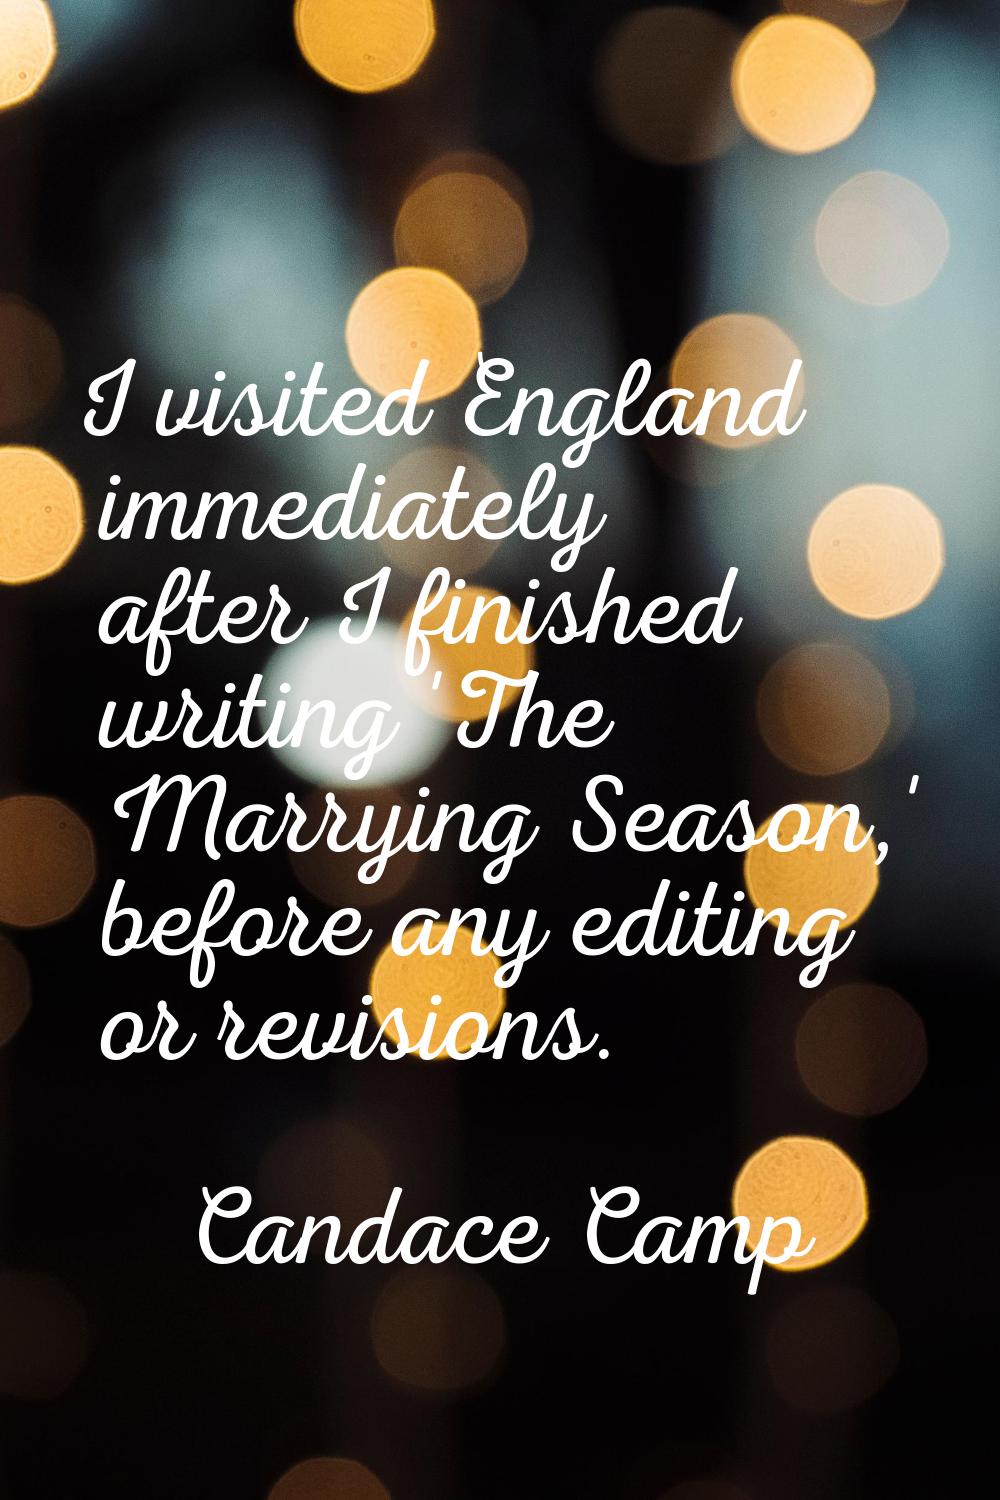 I visited England immediately after I finished writing 'The Marrying Season,' before any editing or